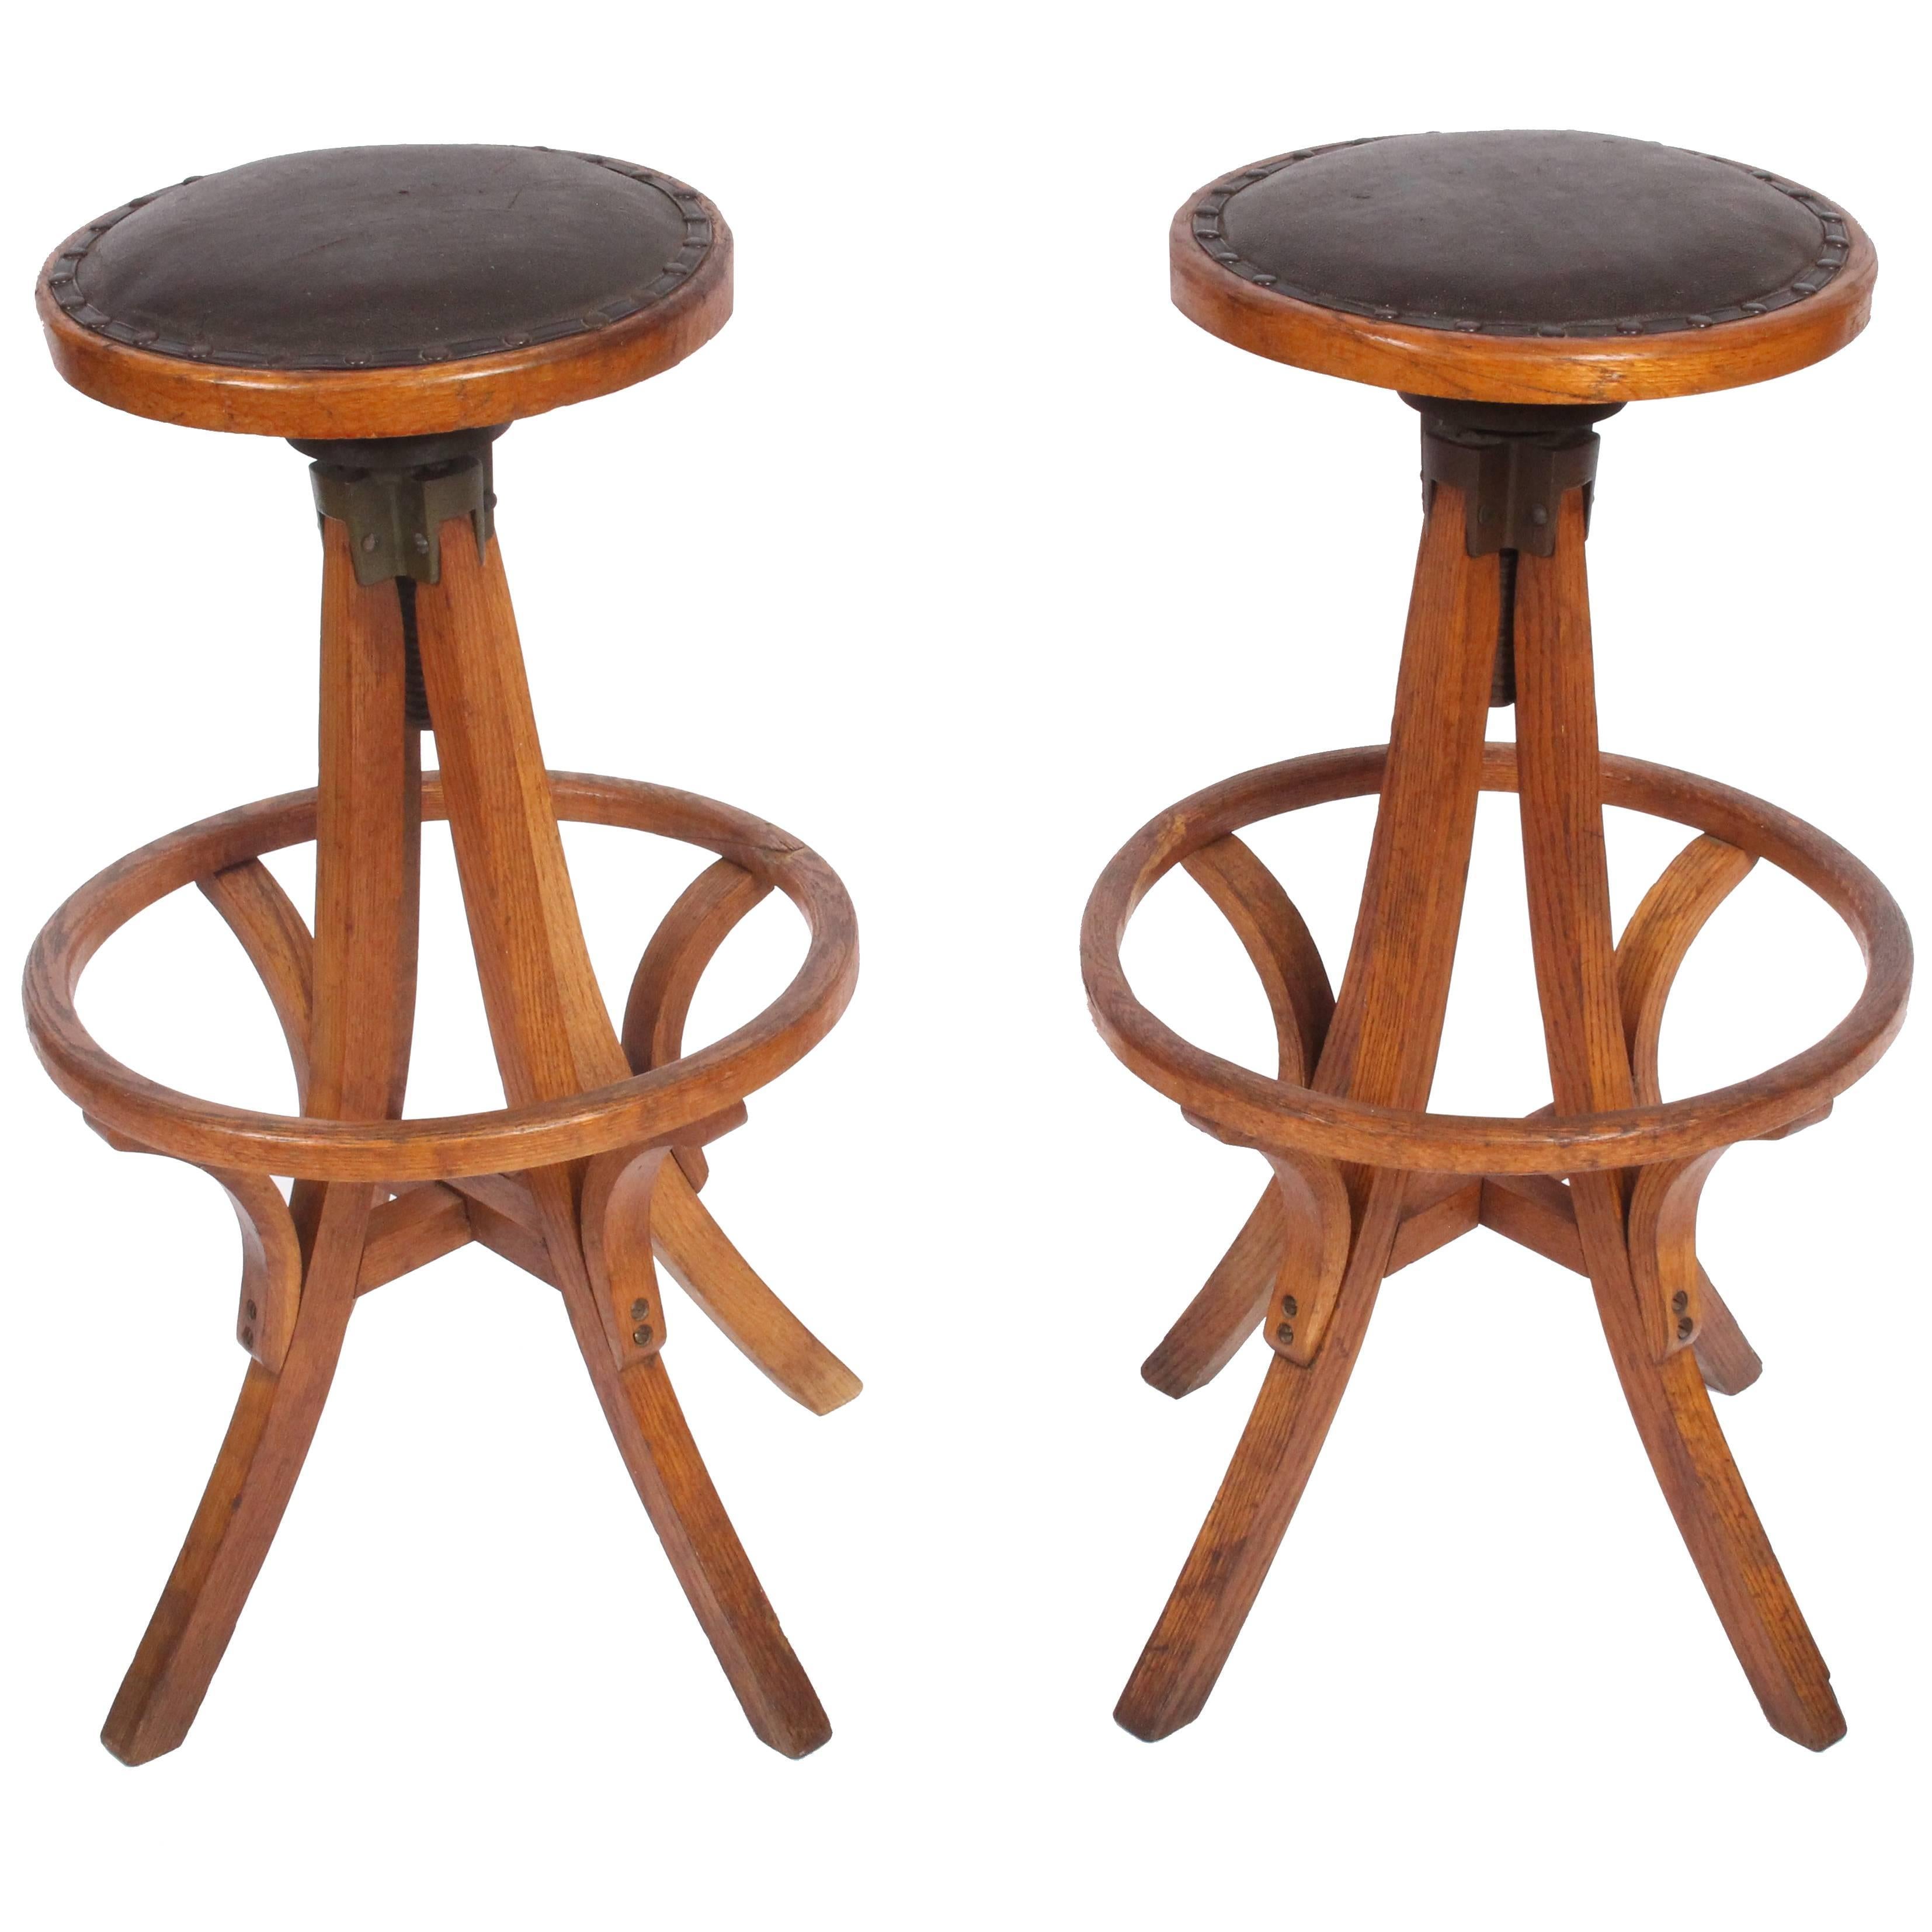 Pair of Oak & Leather Architect Swivel Stools with Heel Ring, Circa 1910 